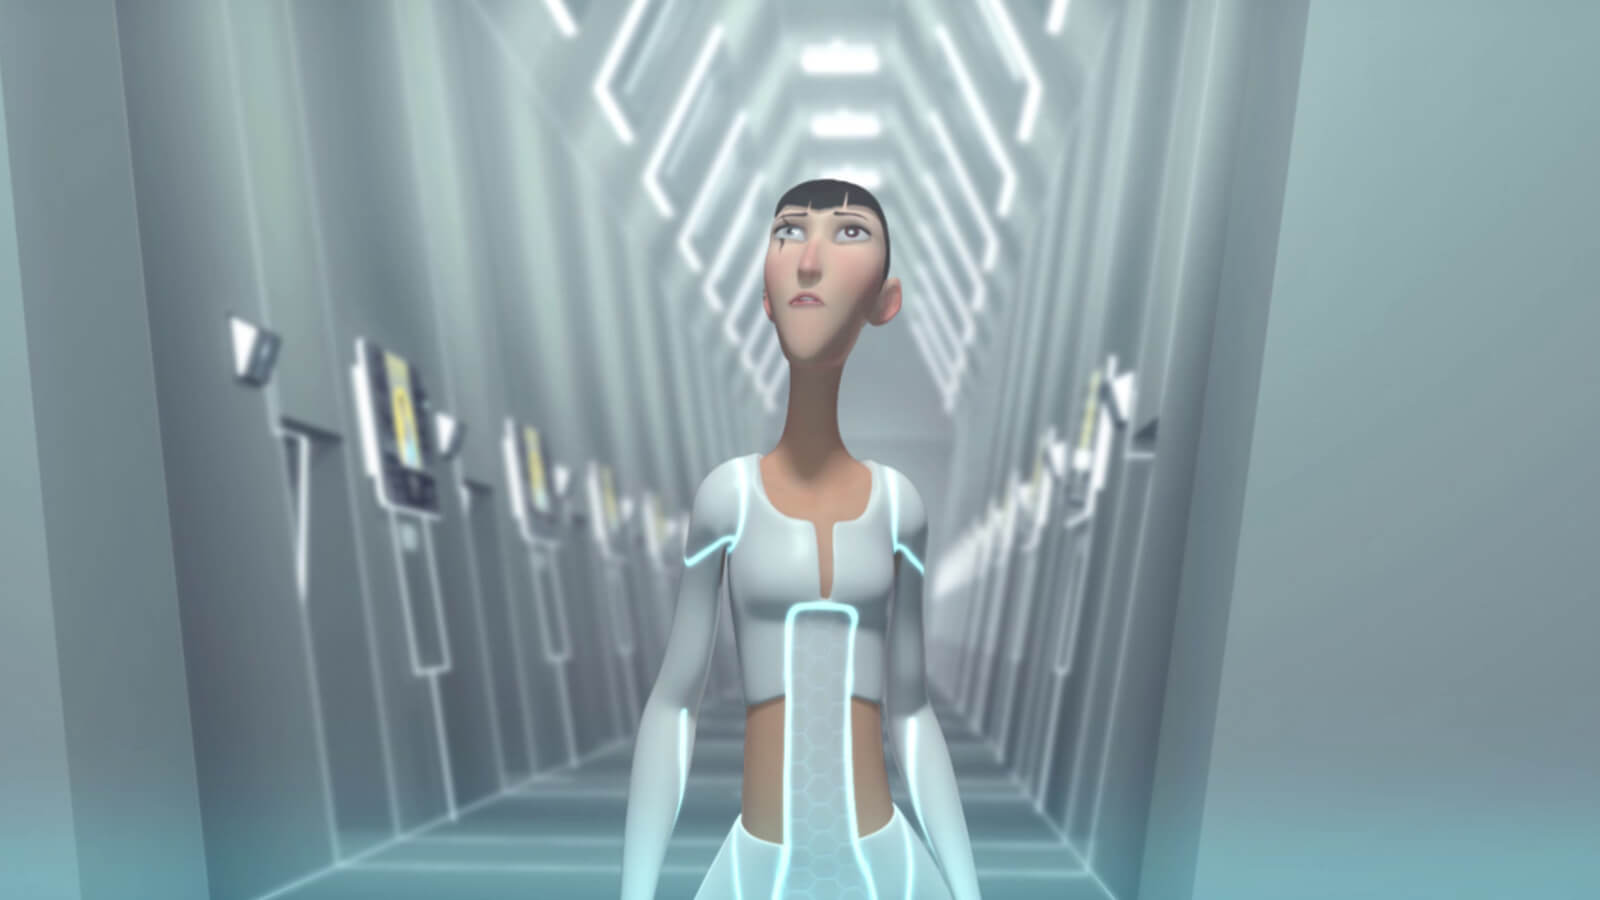 A tall, thin woman with a scar over her eye with futuristic white clothing walks down a brightly lit white corridor